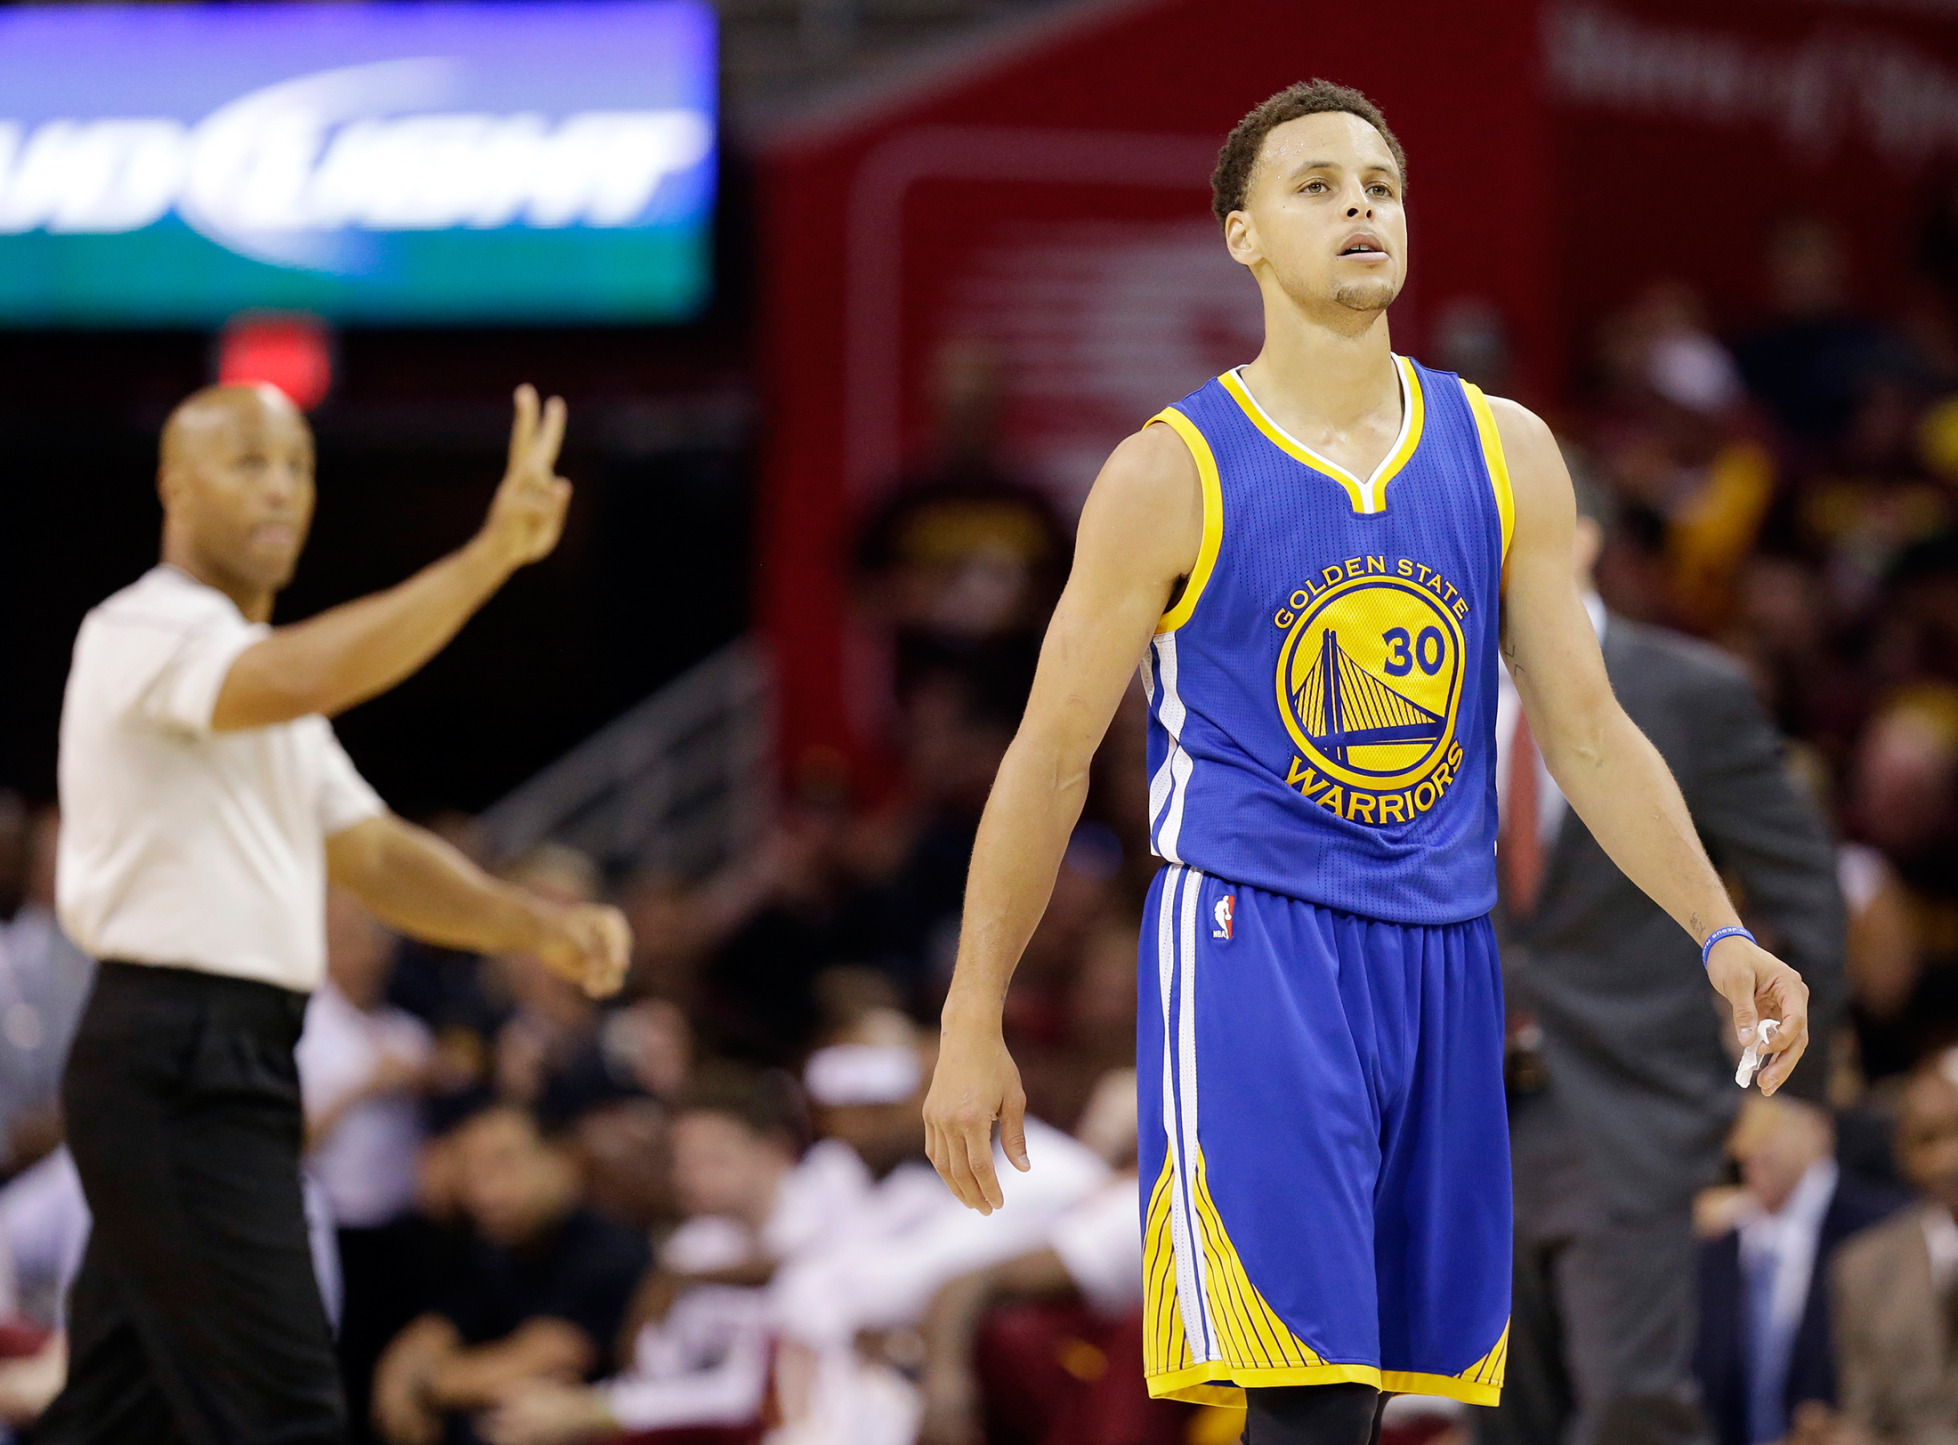 Stephen Curry of the Golden State Warriors during Game 6 of the NBA Finals.
